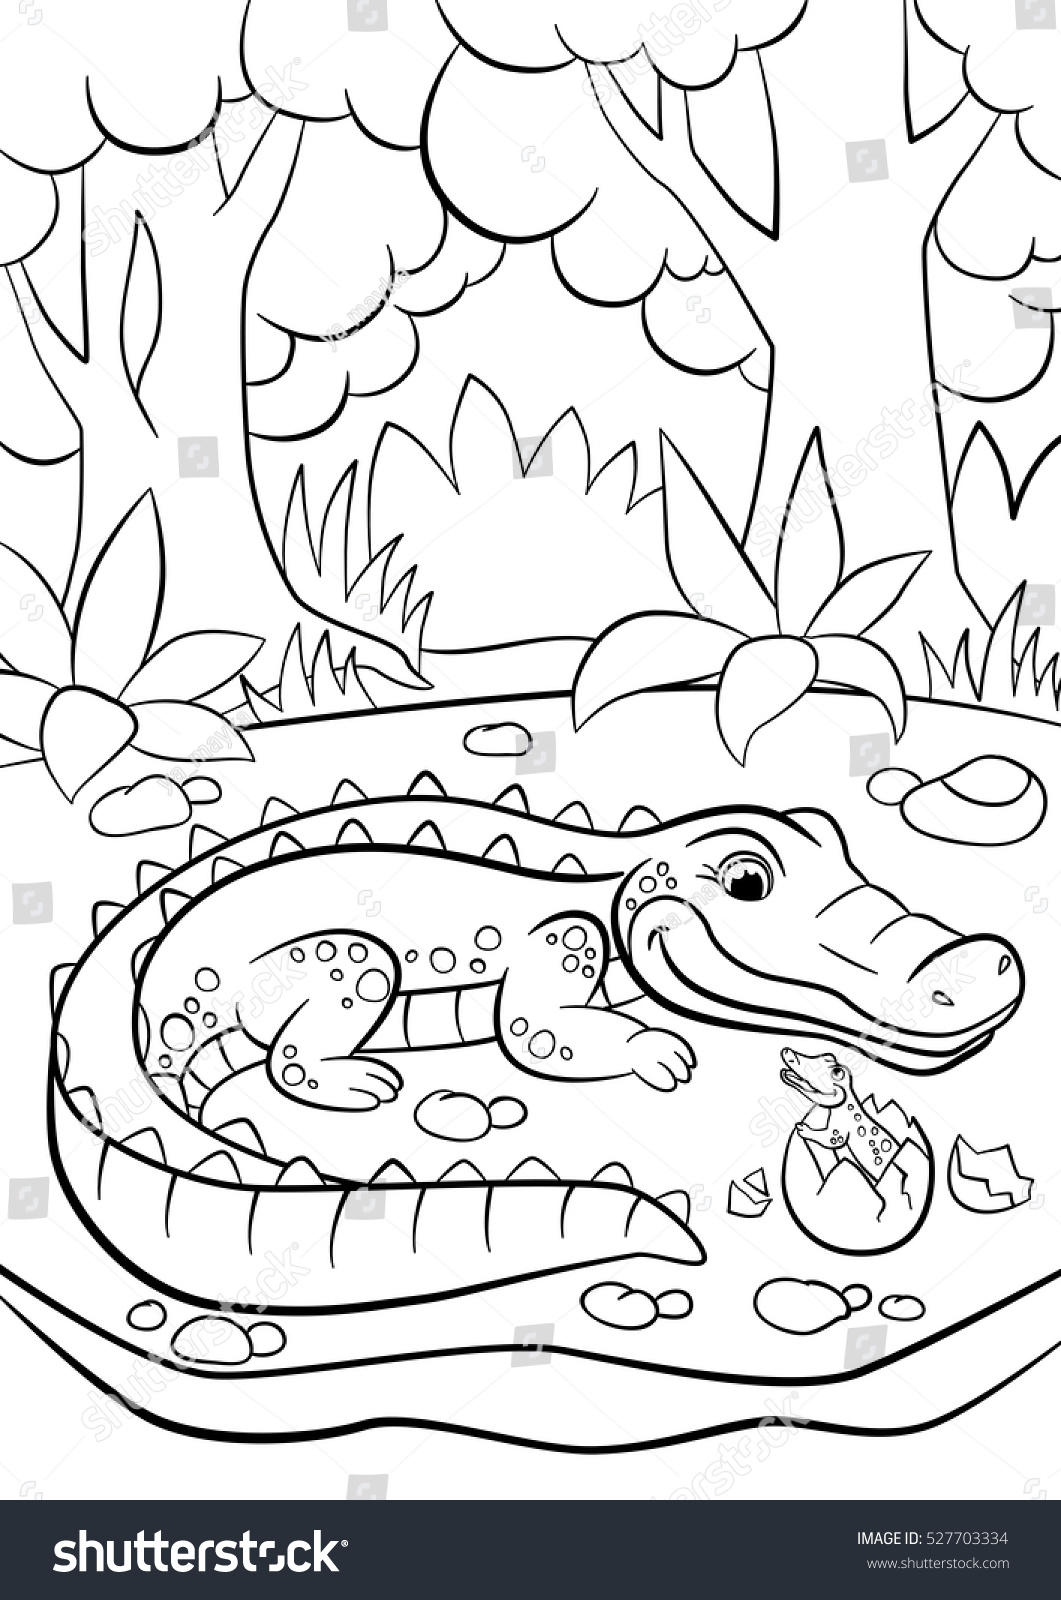 Coloring Page Animals Mother Alligator Looks Stock Vector Royalty ...